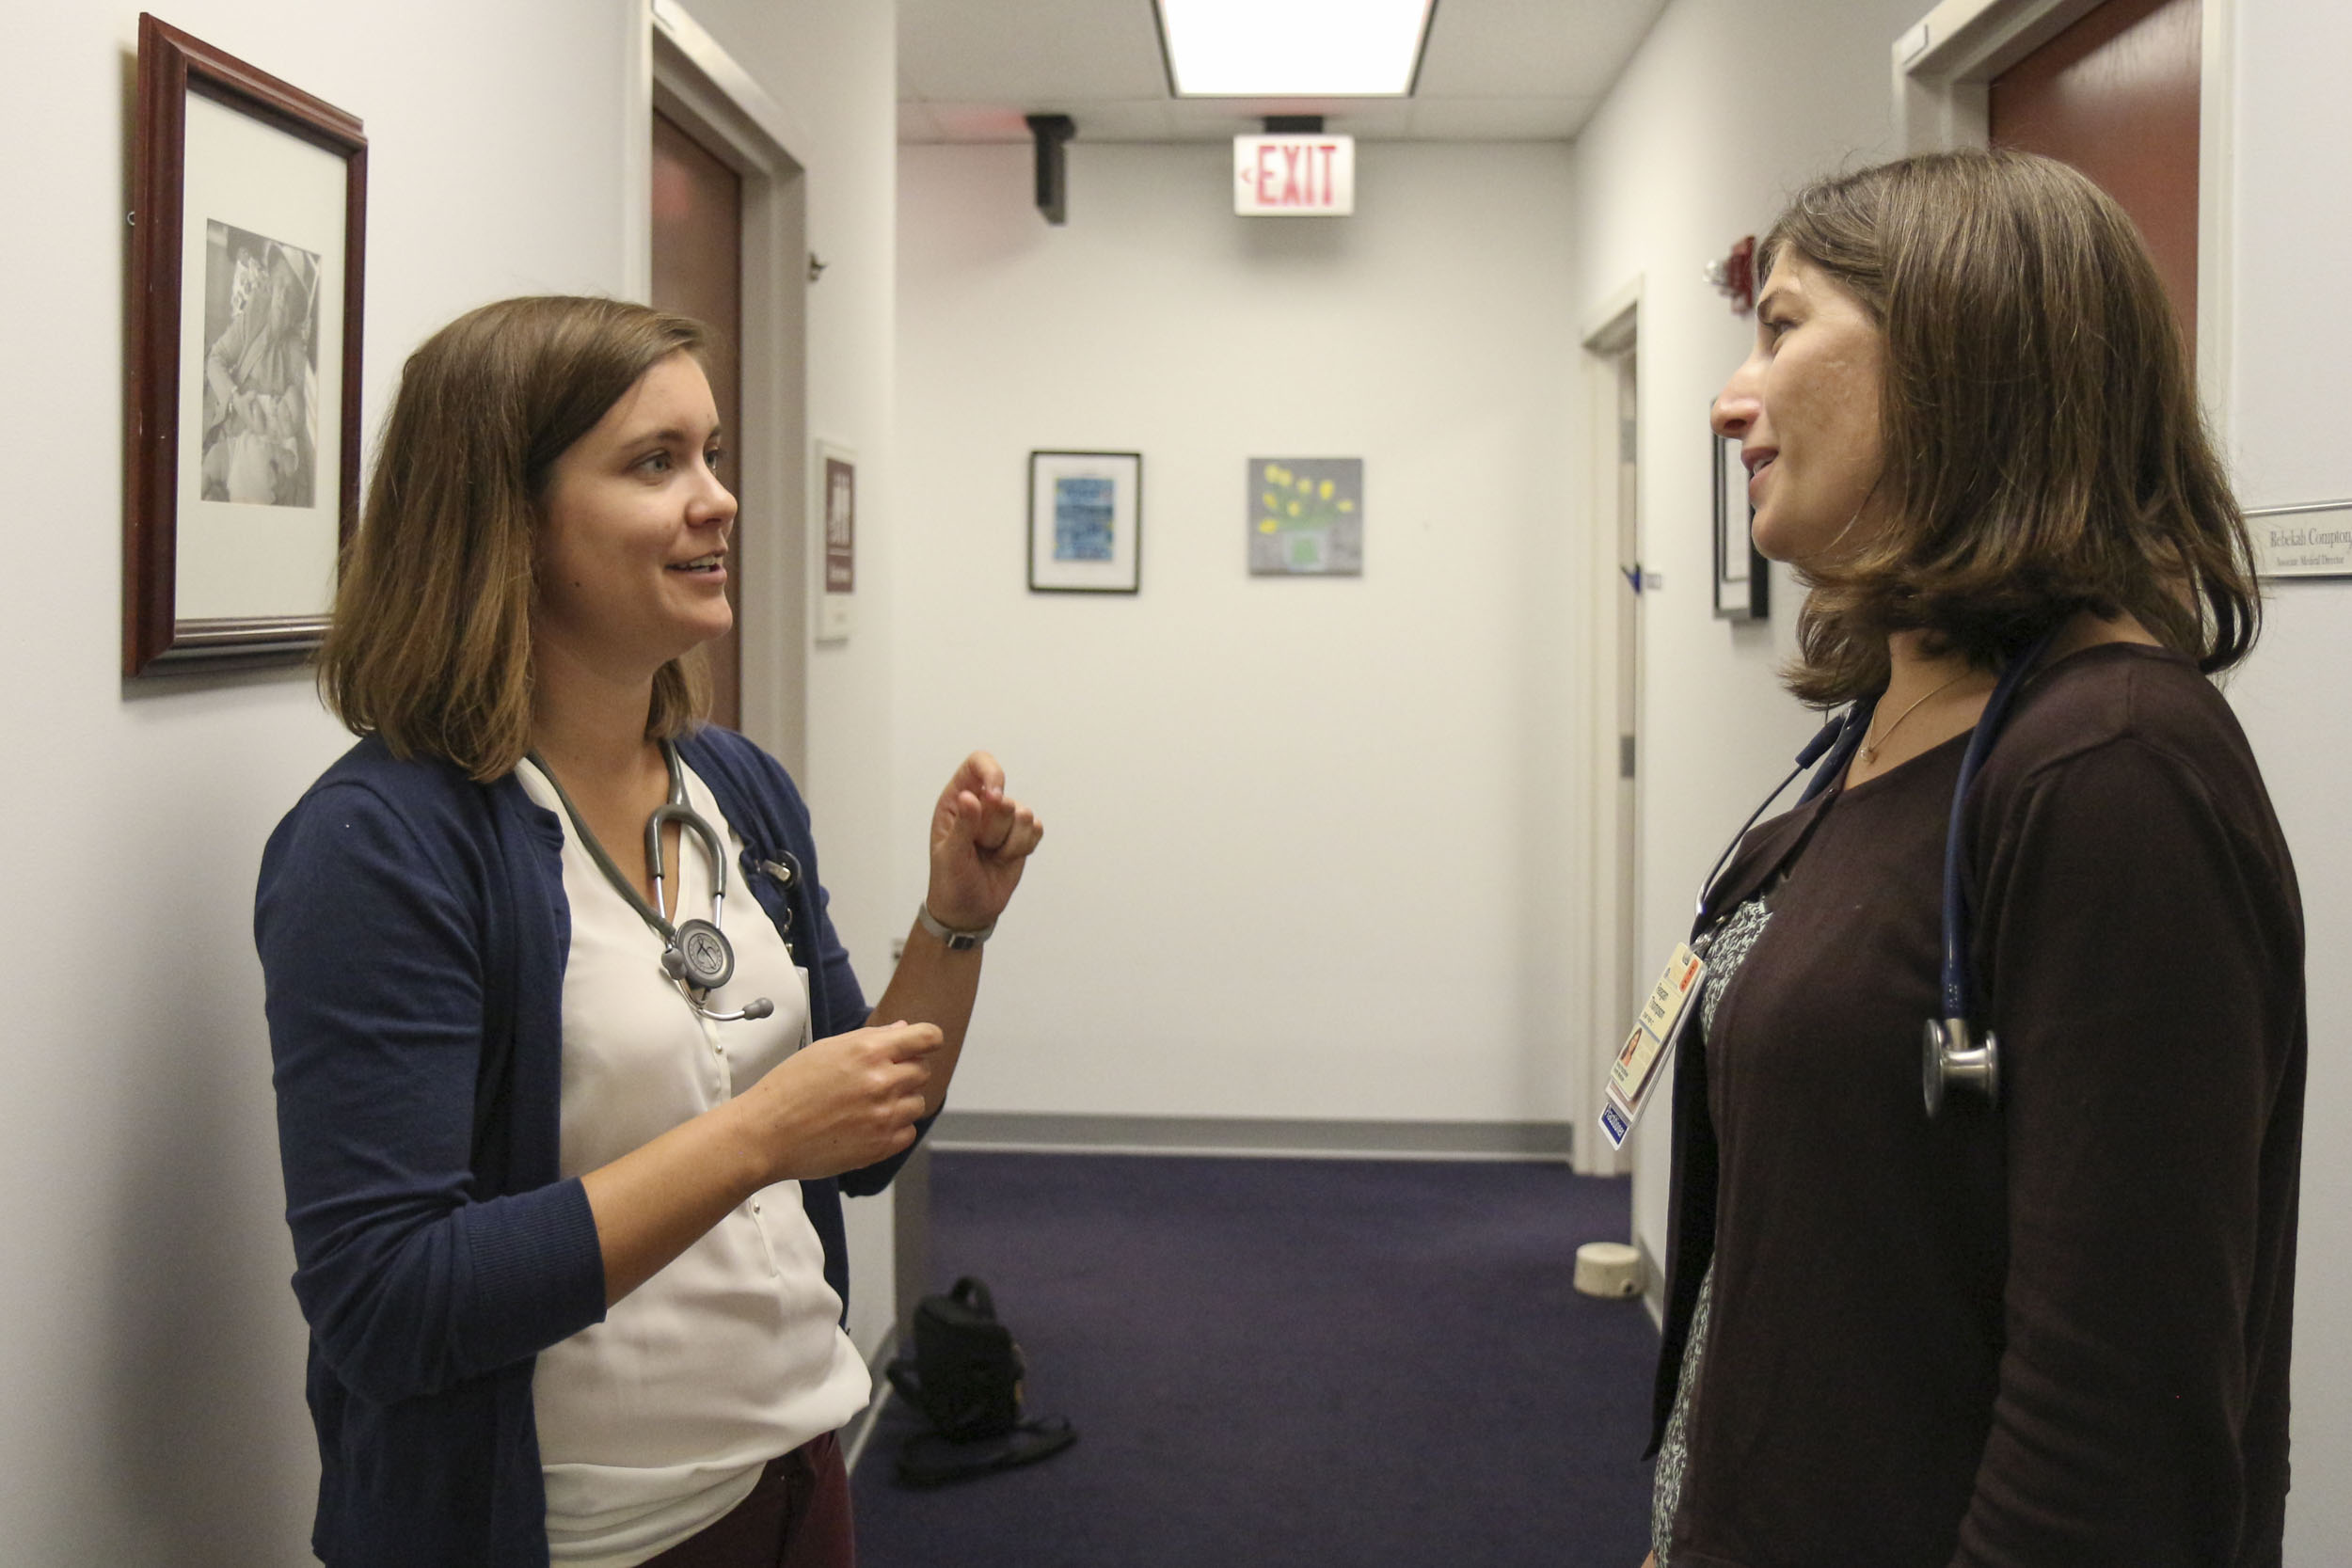 Maggie Spriggs, left, chats with  Reagan Thompson, right, in a hallway